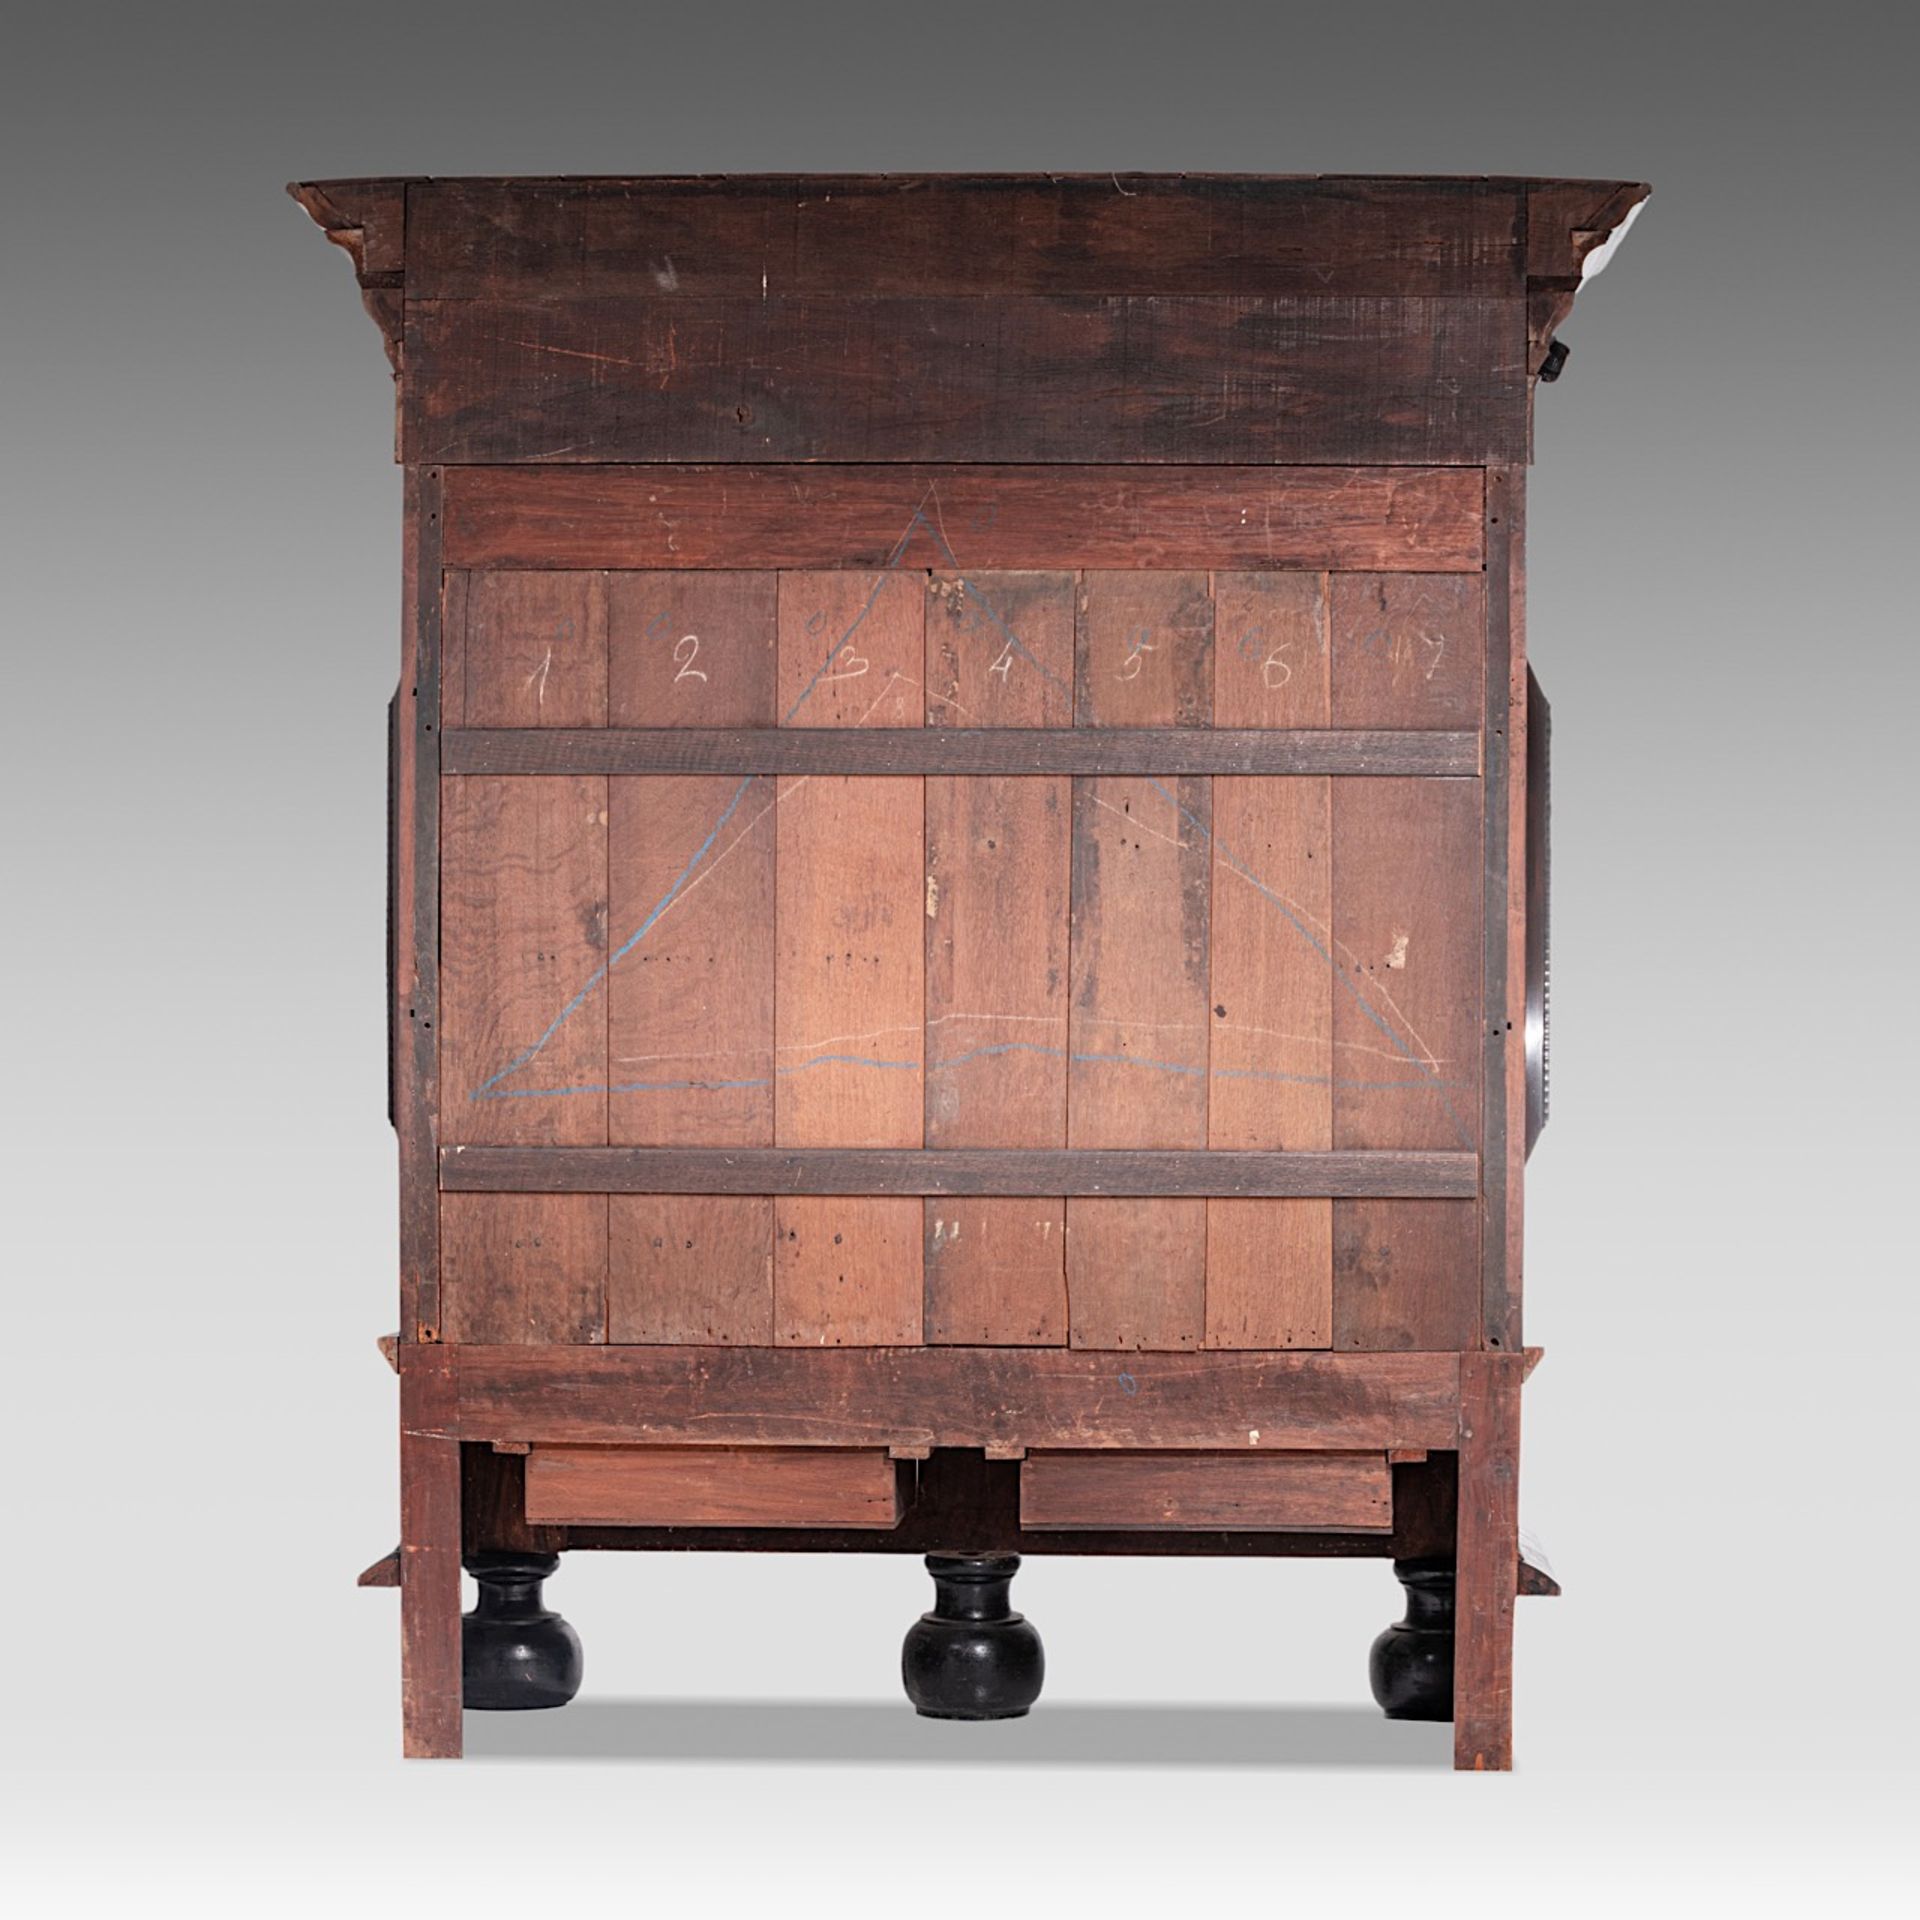 A large Baroque style rosewood and ebony cupboard, H 235 - W 200 - D 85 cm - Image 4 of 6